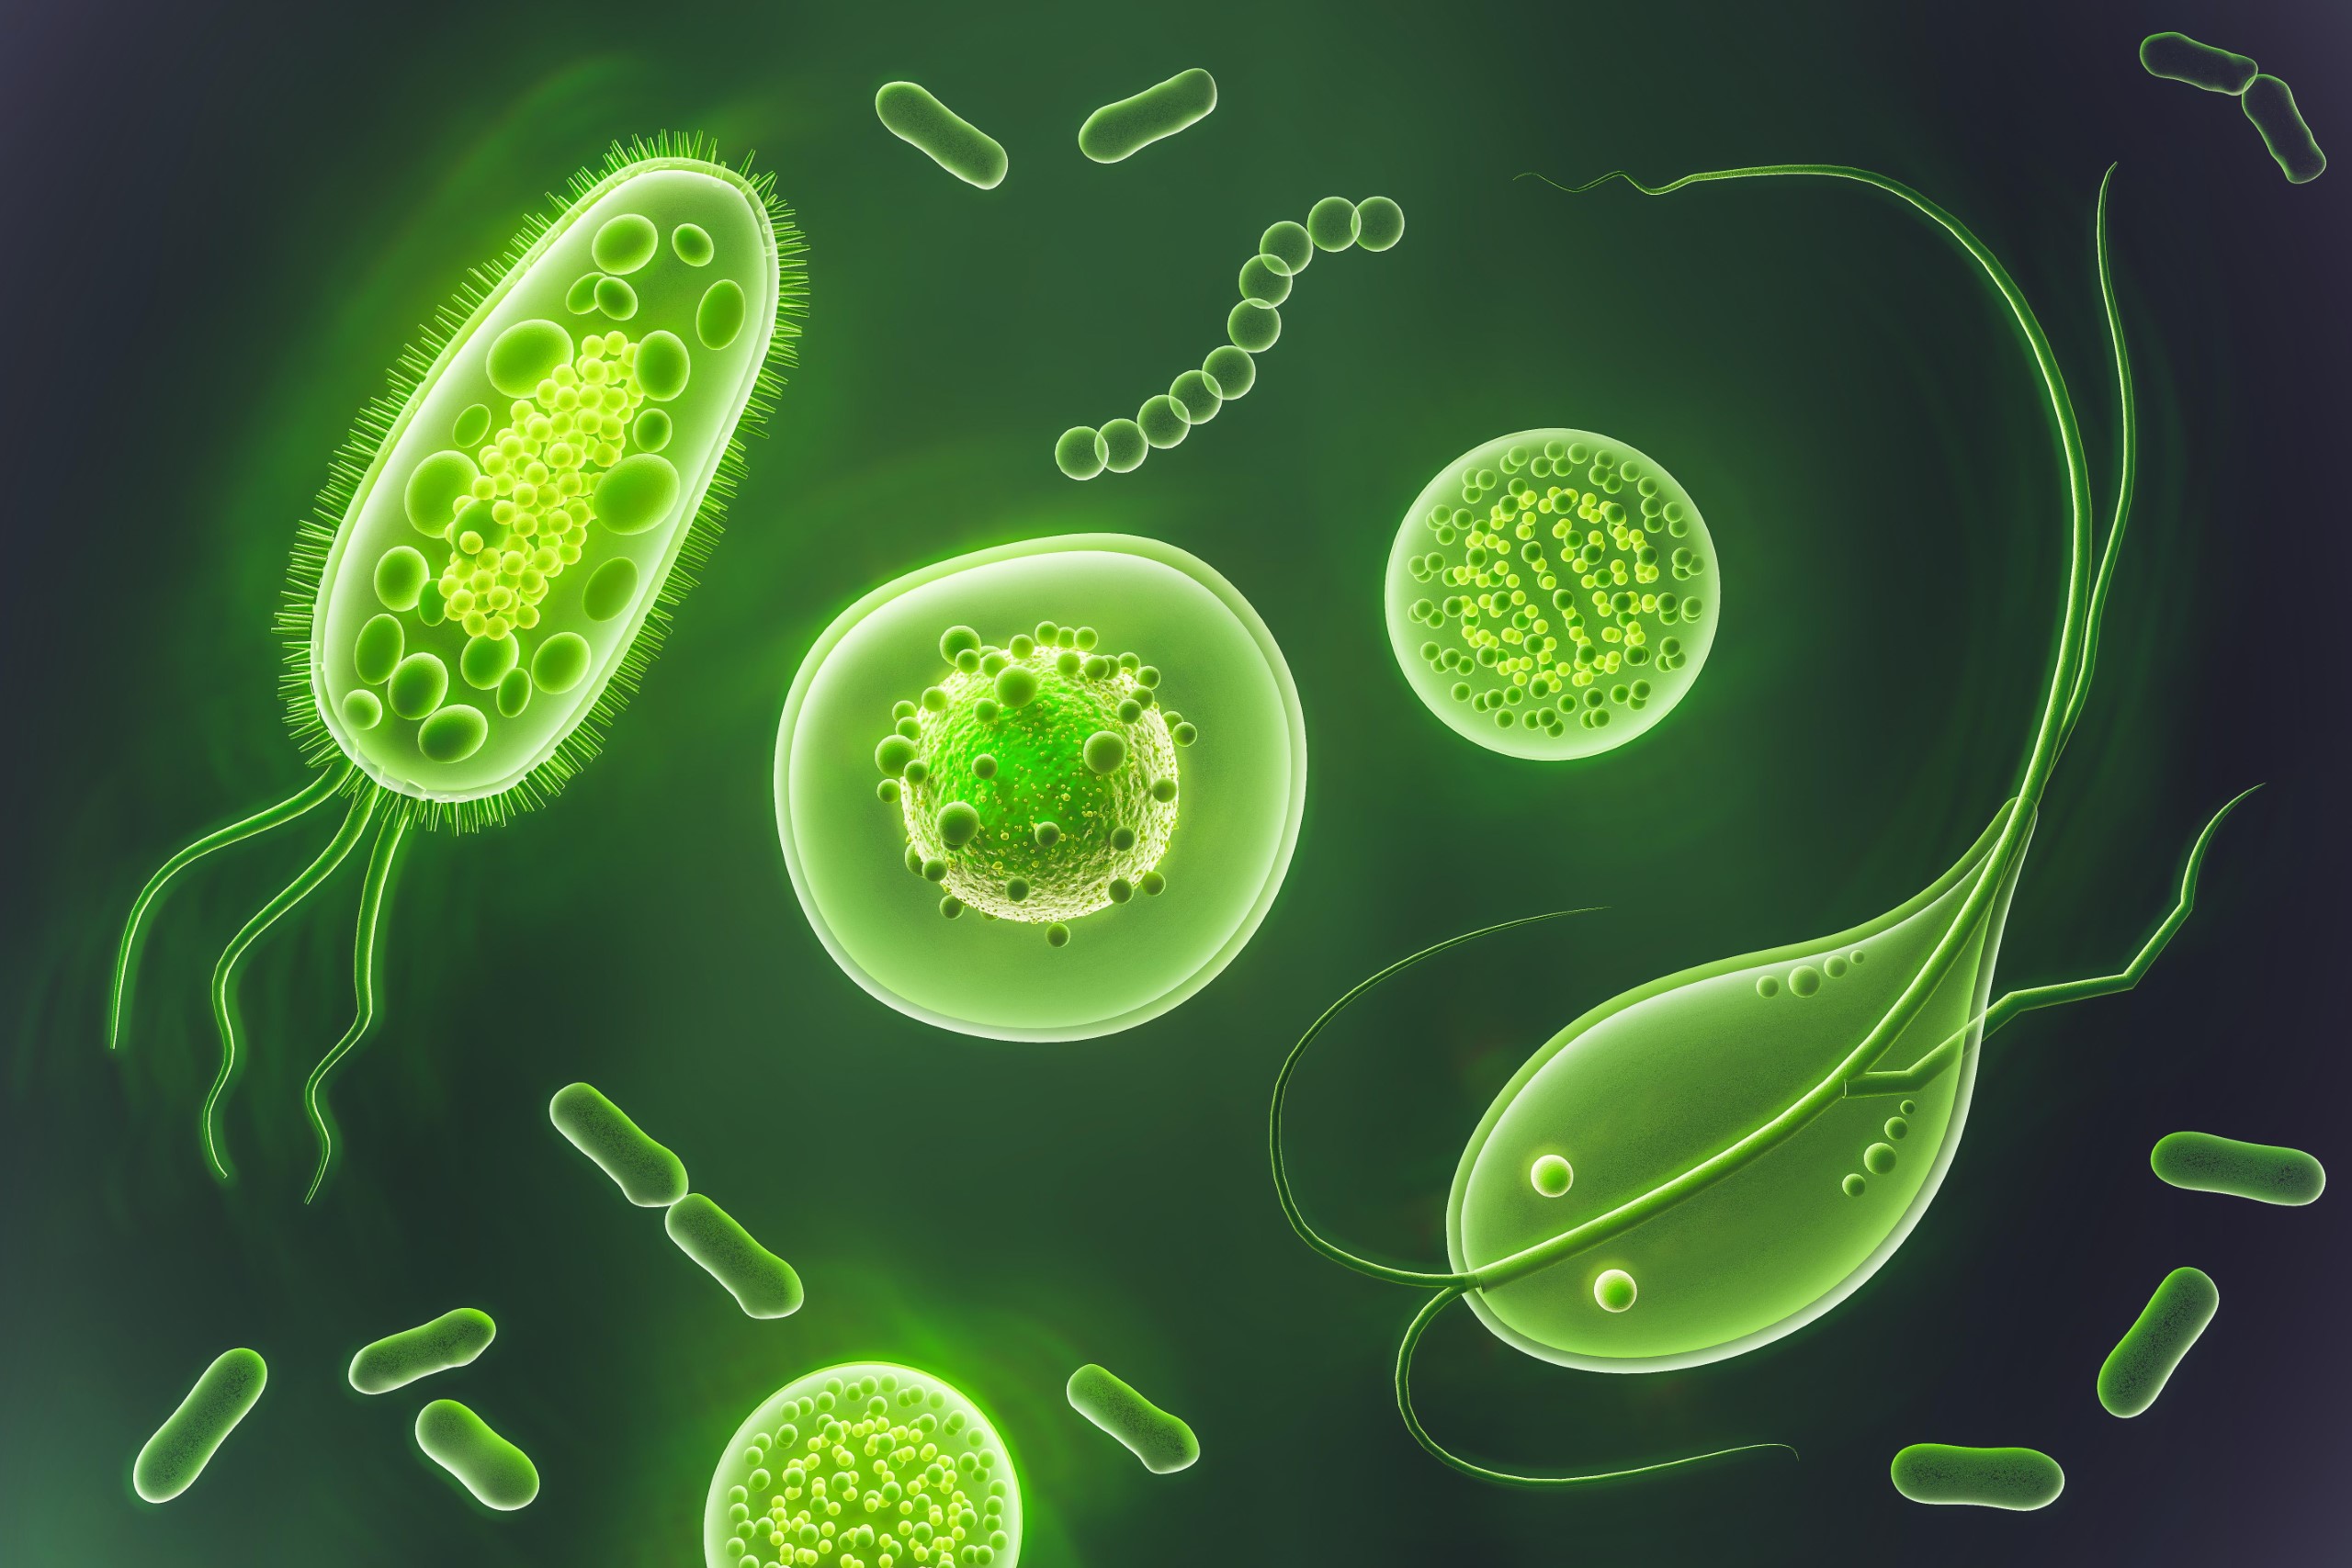 Naturopathic Treatments of Microorganisms